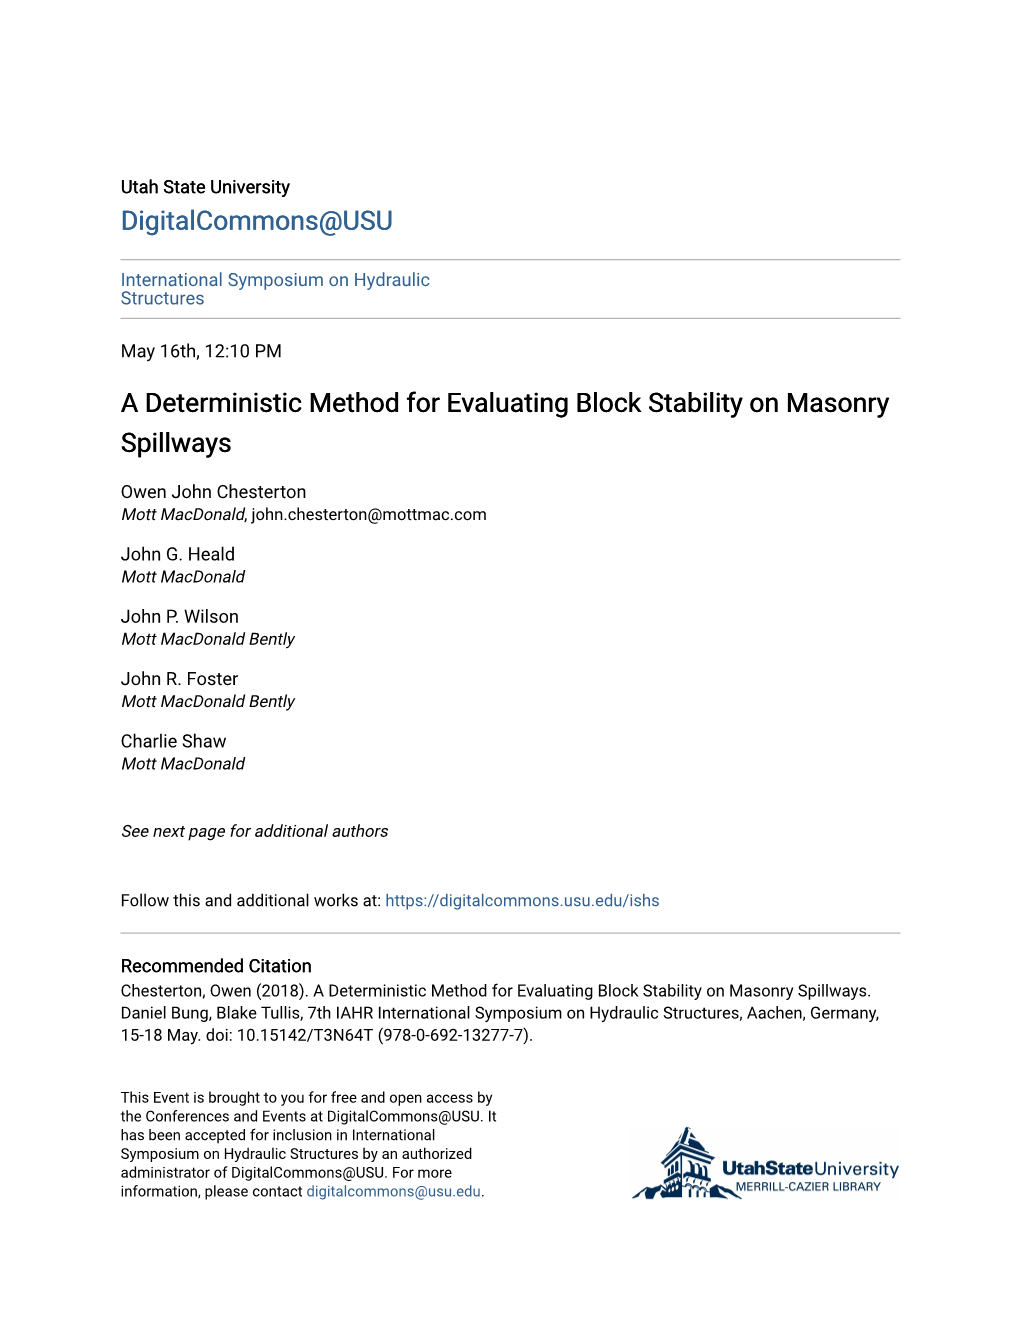 A Deterministic Method for Evaluating Block Stability on Masonry Spillways